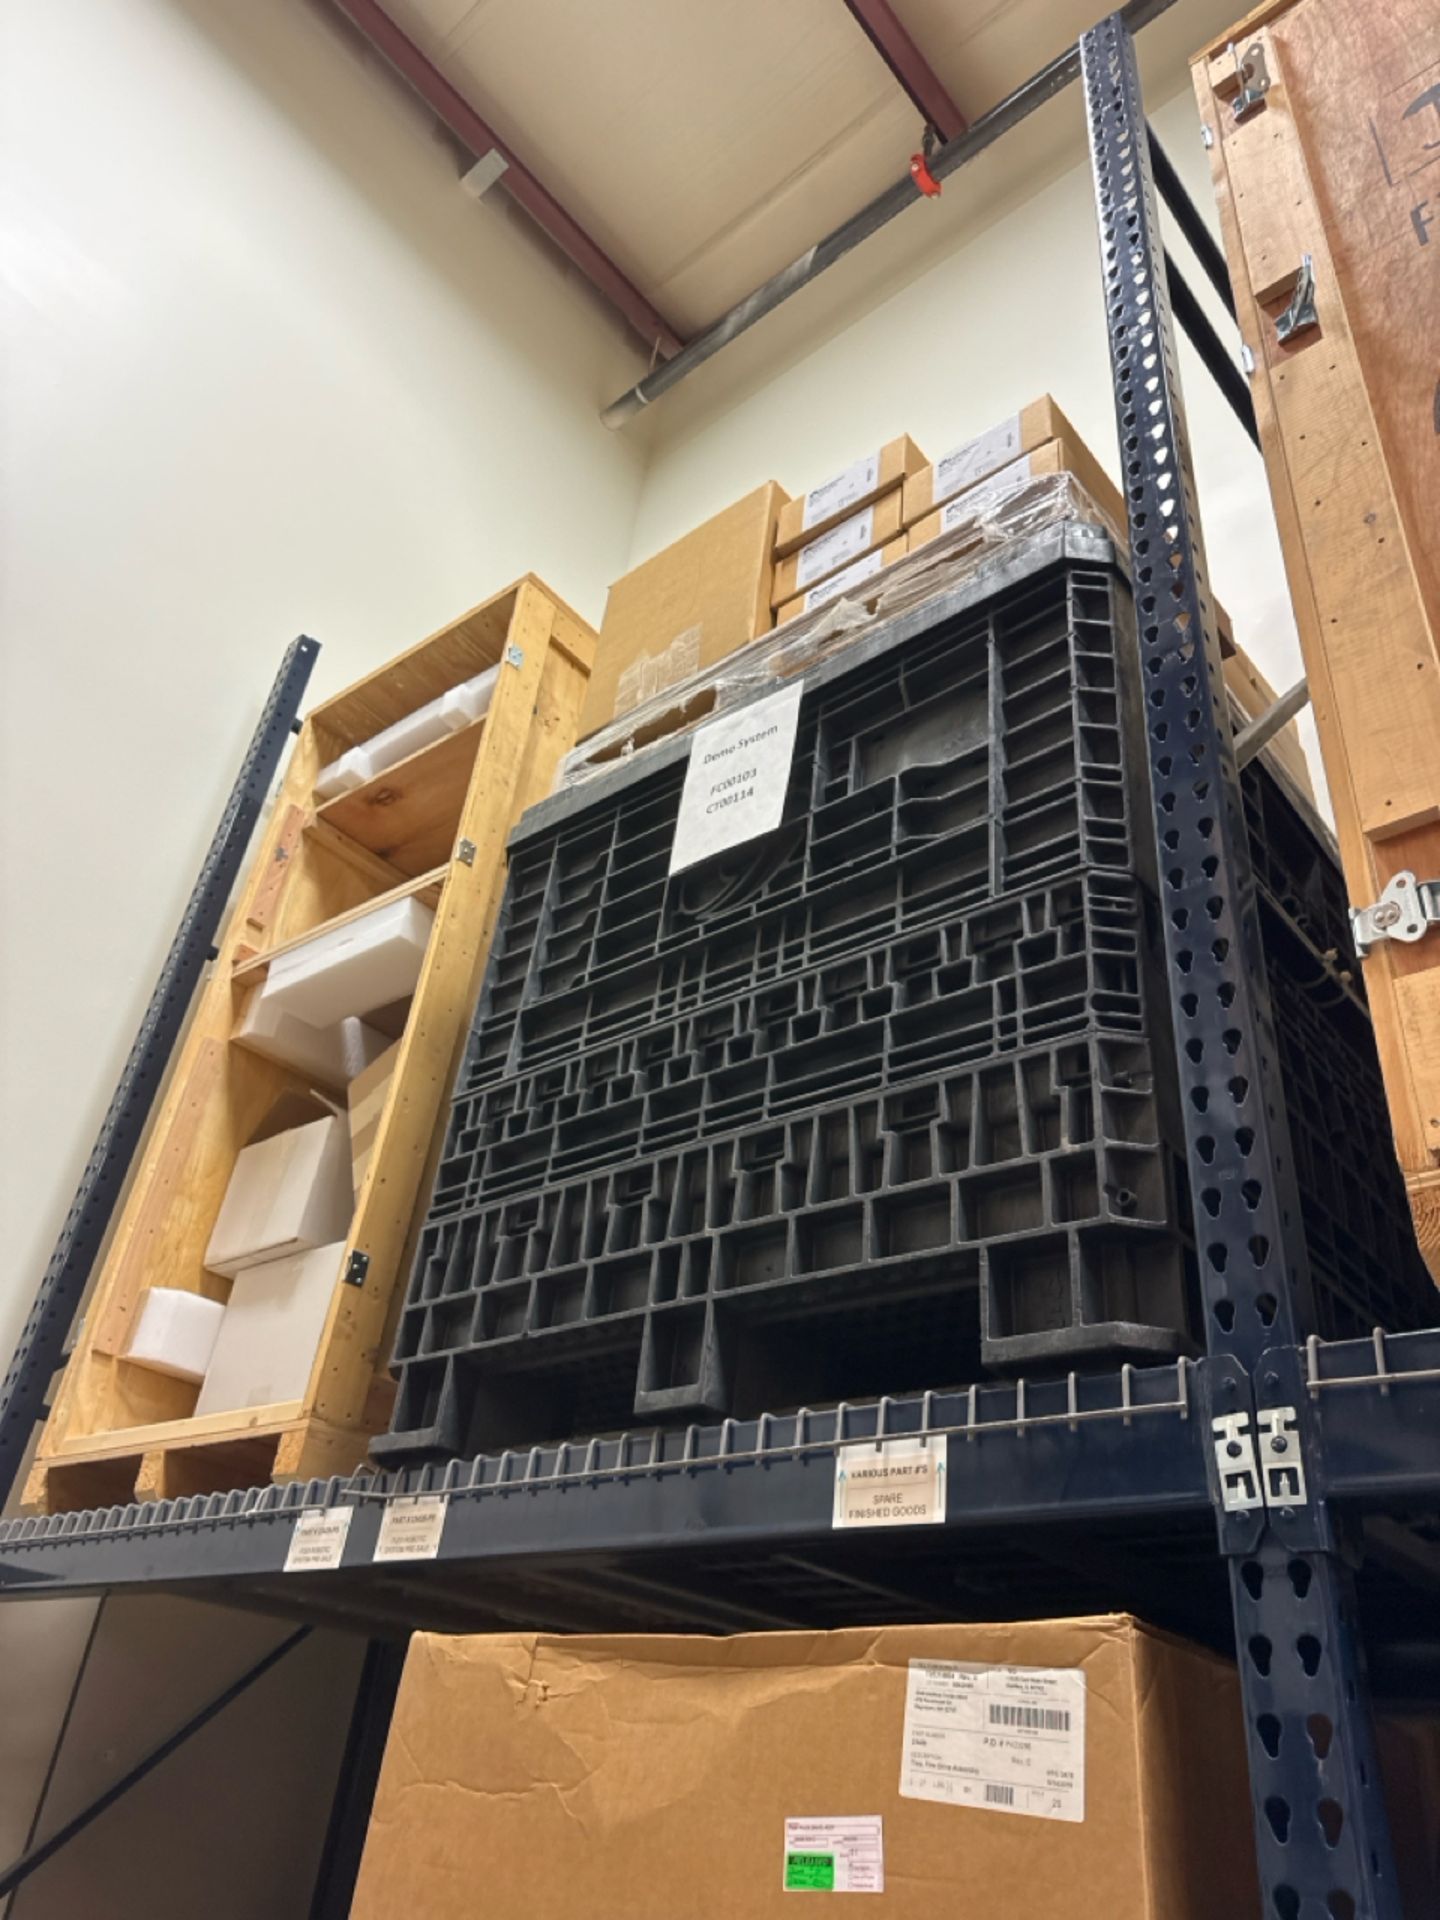 Contents of Right Wall Pallet Racking - Image 17 of 19